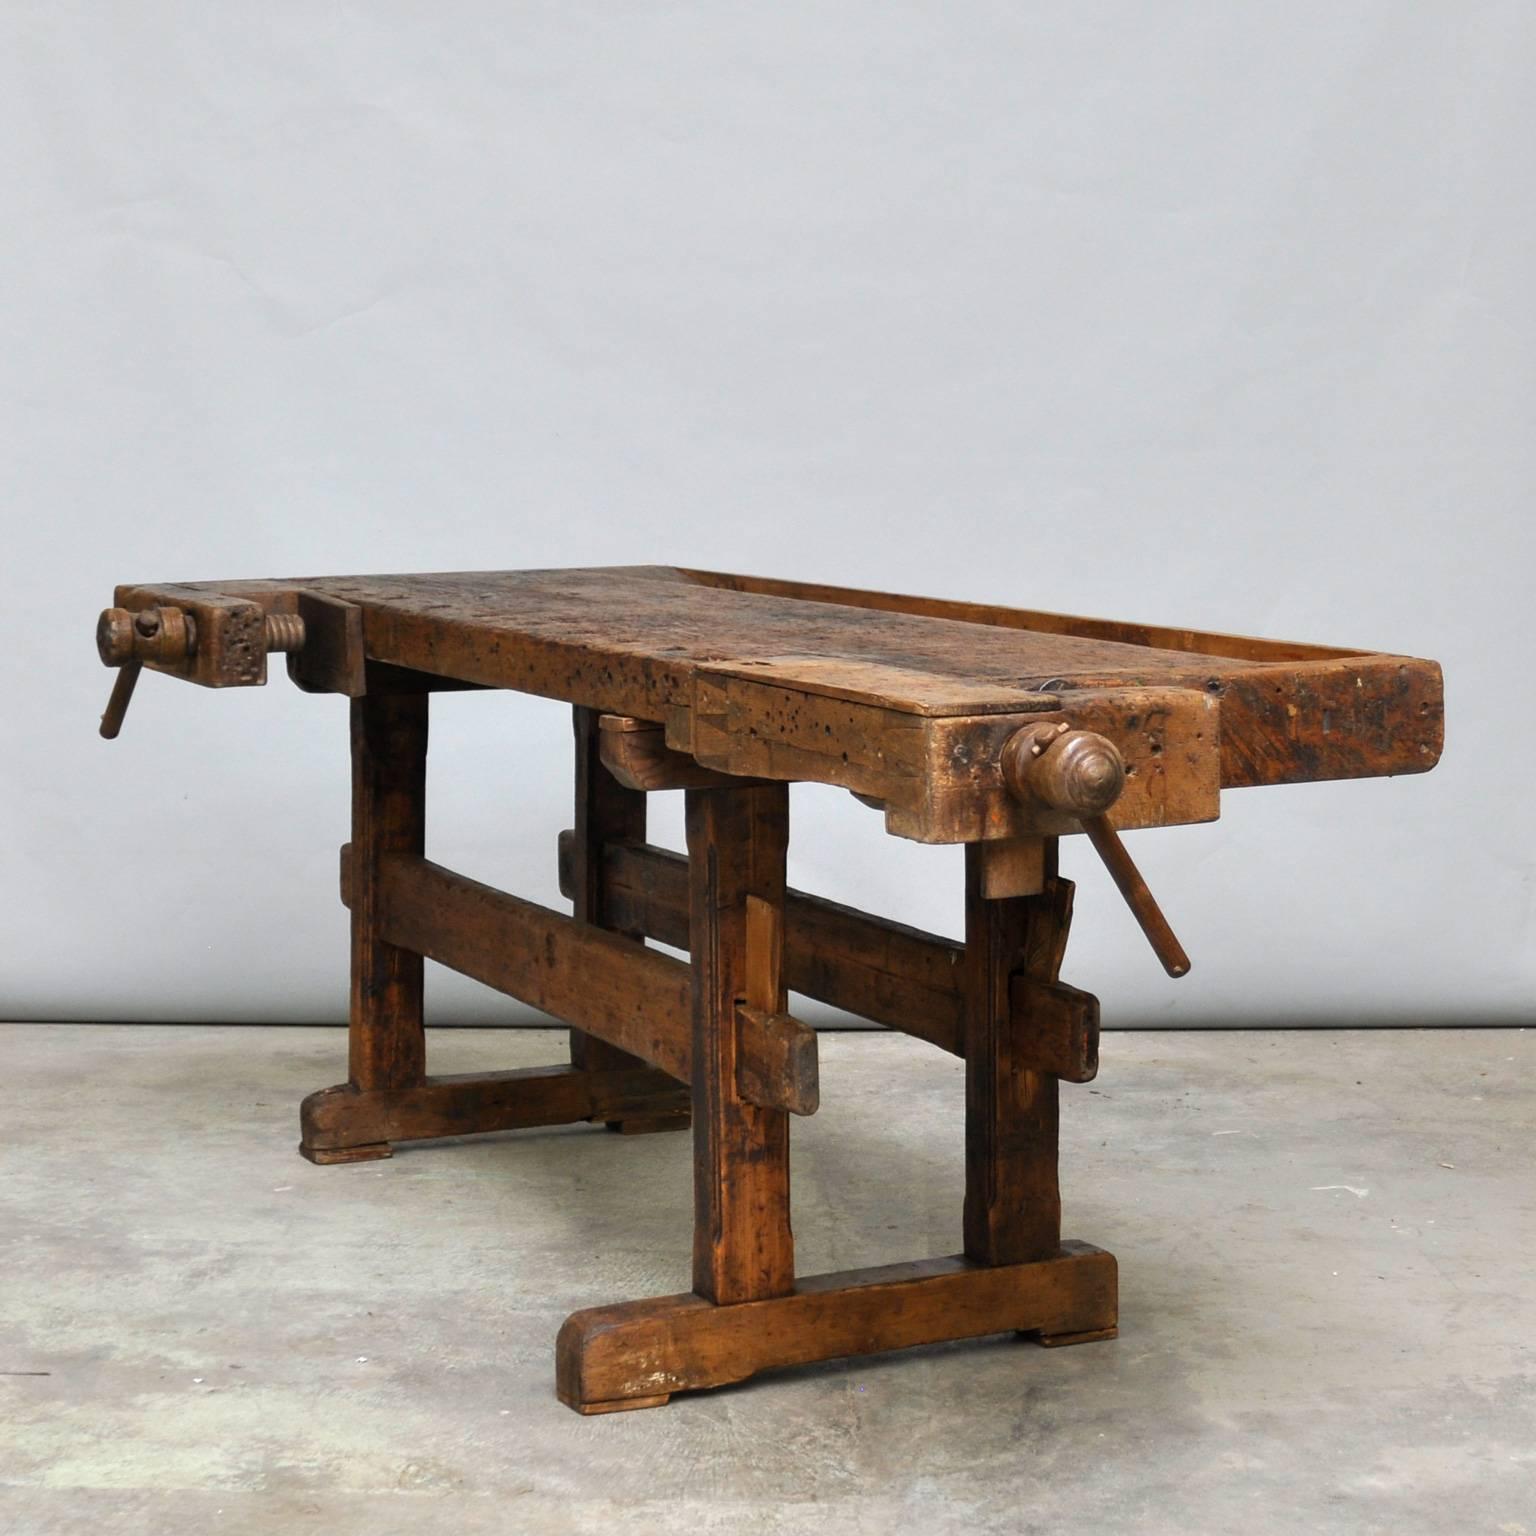 Antique Hungarian carpenters’ workbench, bearing a very nice patina after years of use. It has two vices with a wooden handle and a recessed tray where the carpenter would lay his tools. It has been restored and waxed.